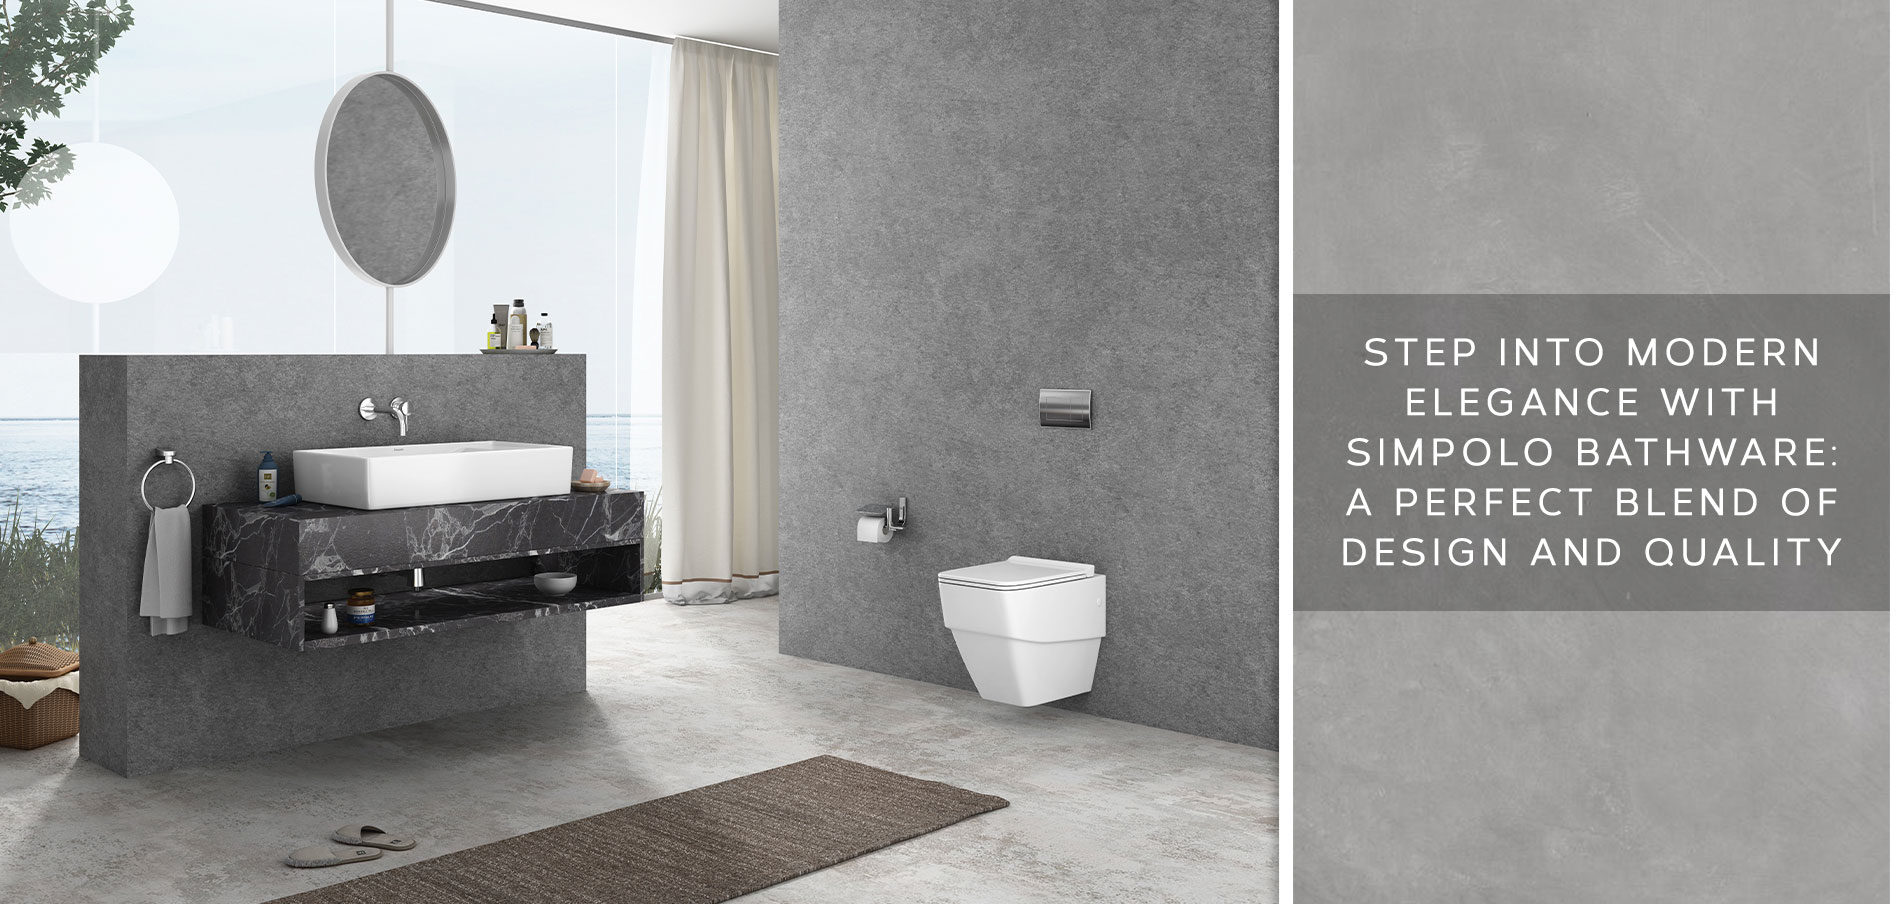 Step into Modern Elegance with Simpolo Bathware